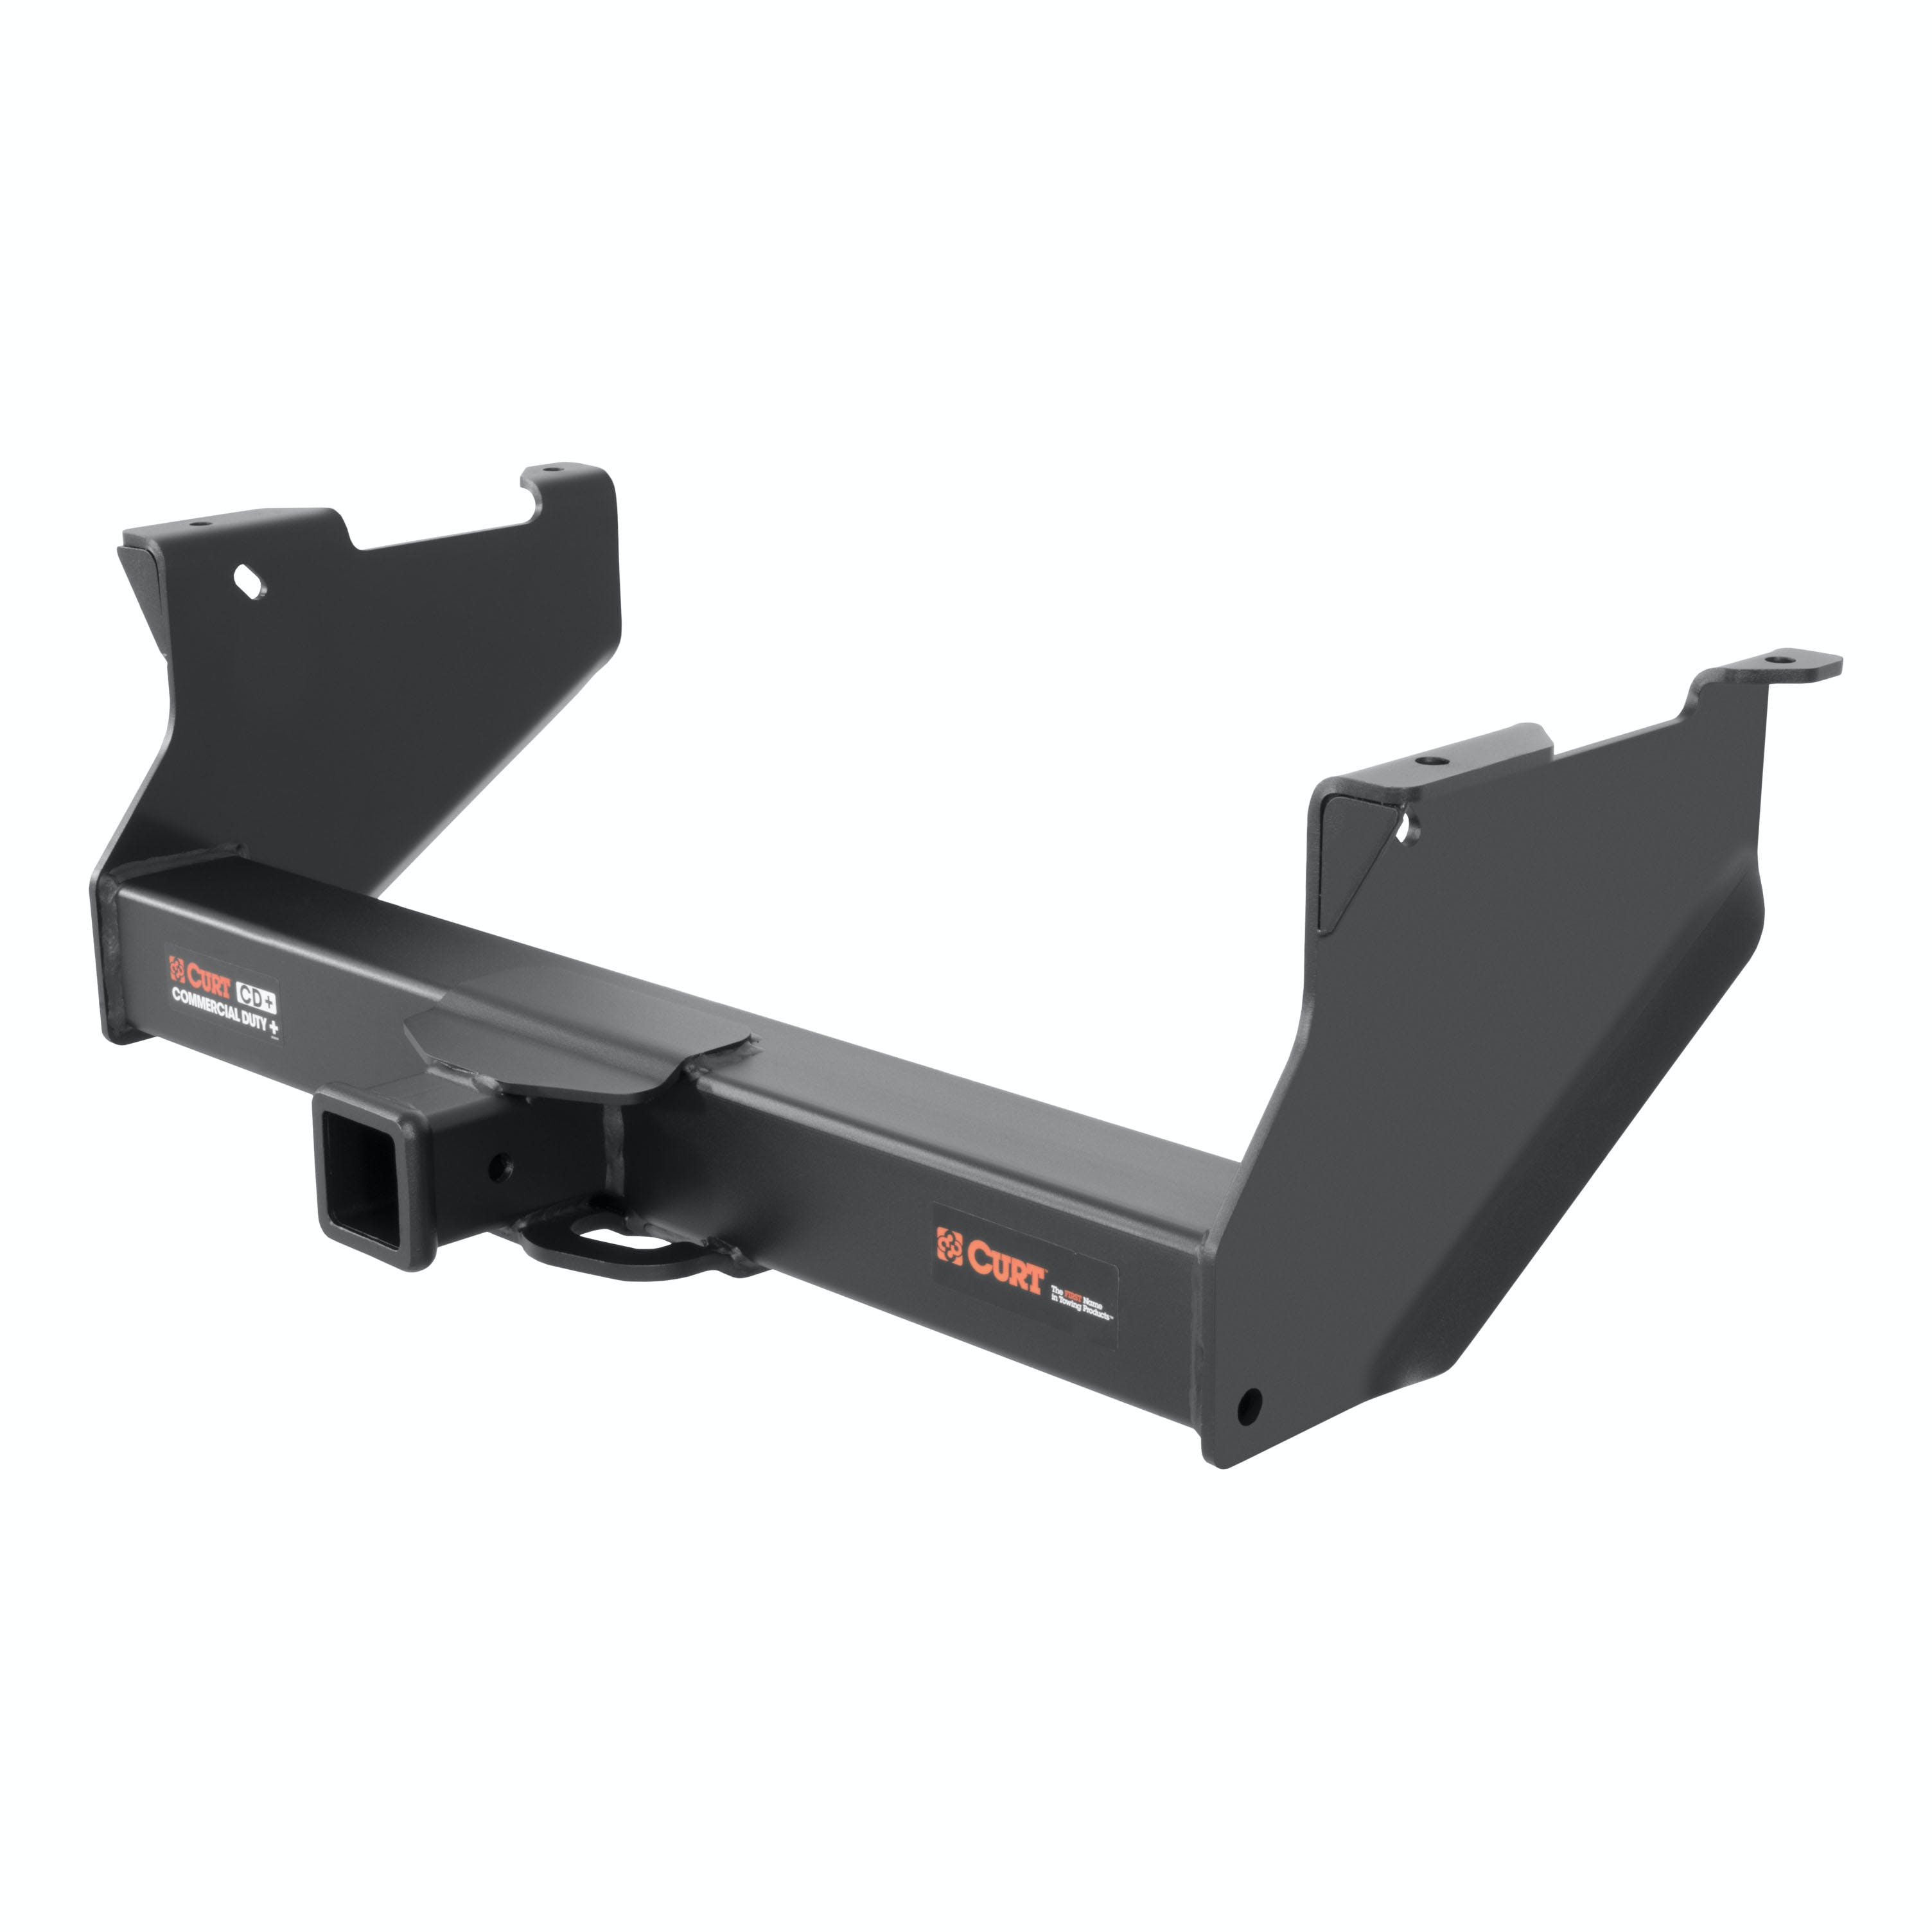 CURT 15801 Commercial Duty Class 5 Trailer Hitch, 2-1/2 Receiver, Select Ram 2500, 3500